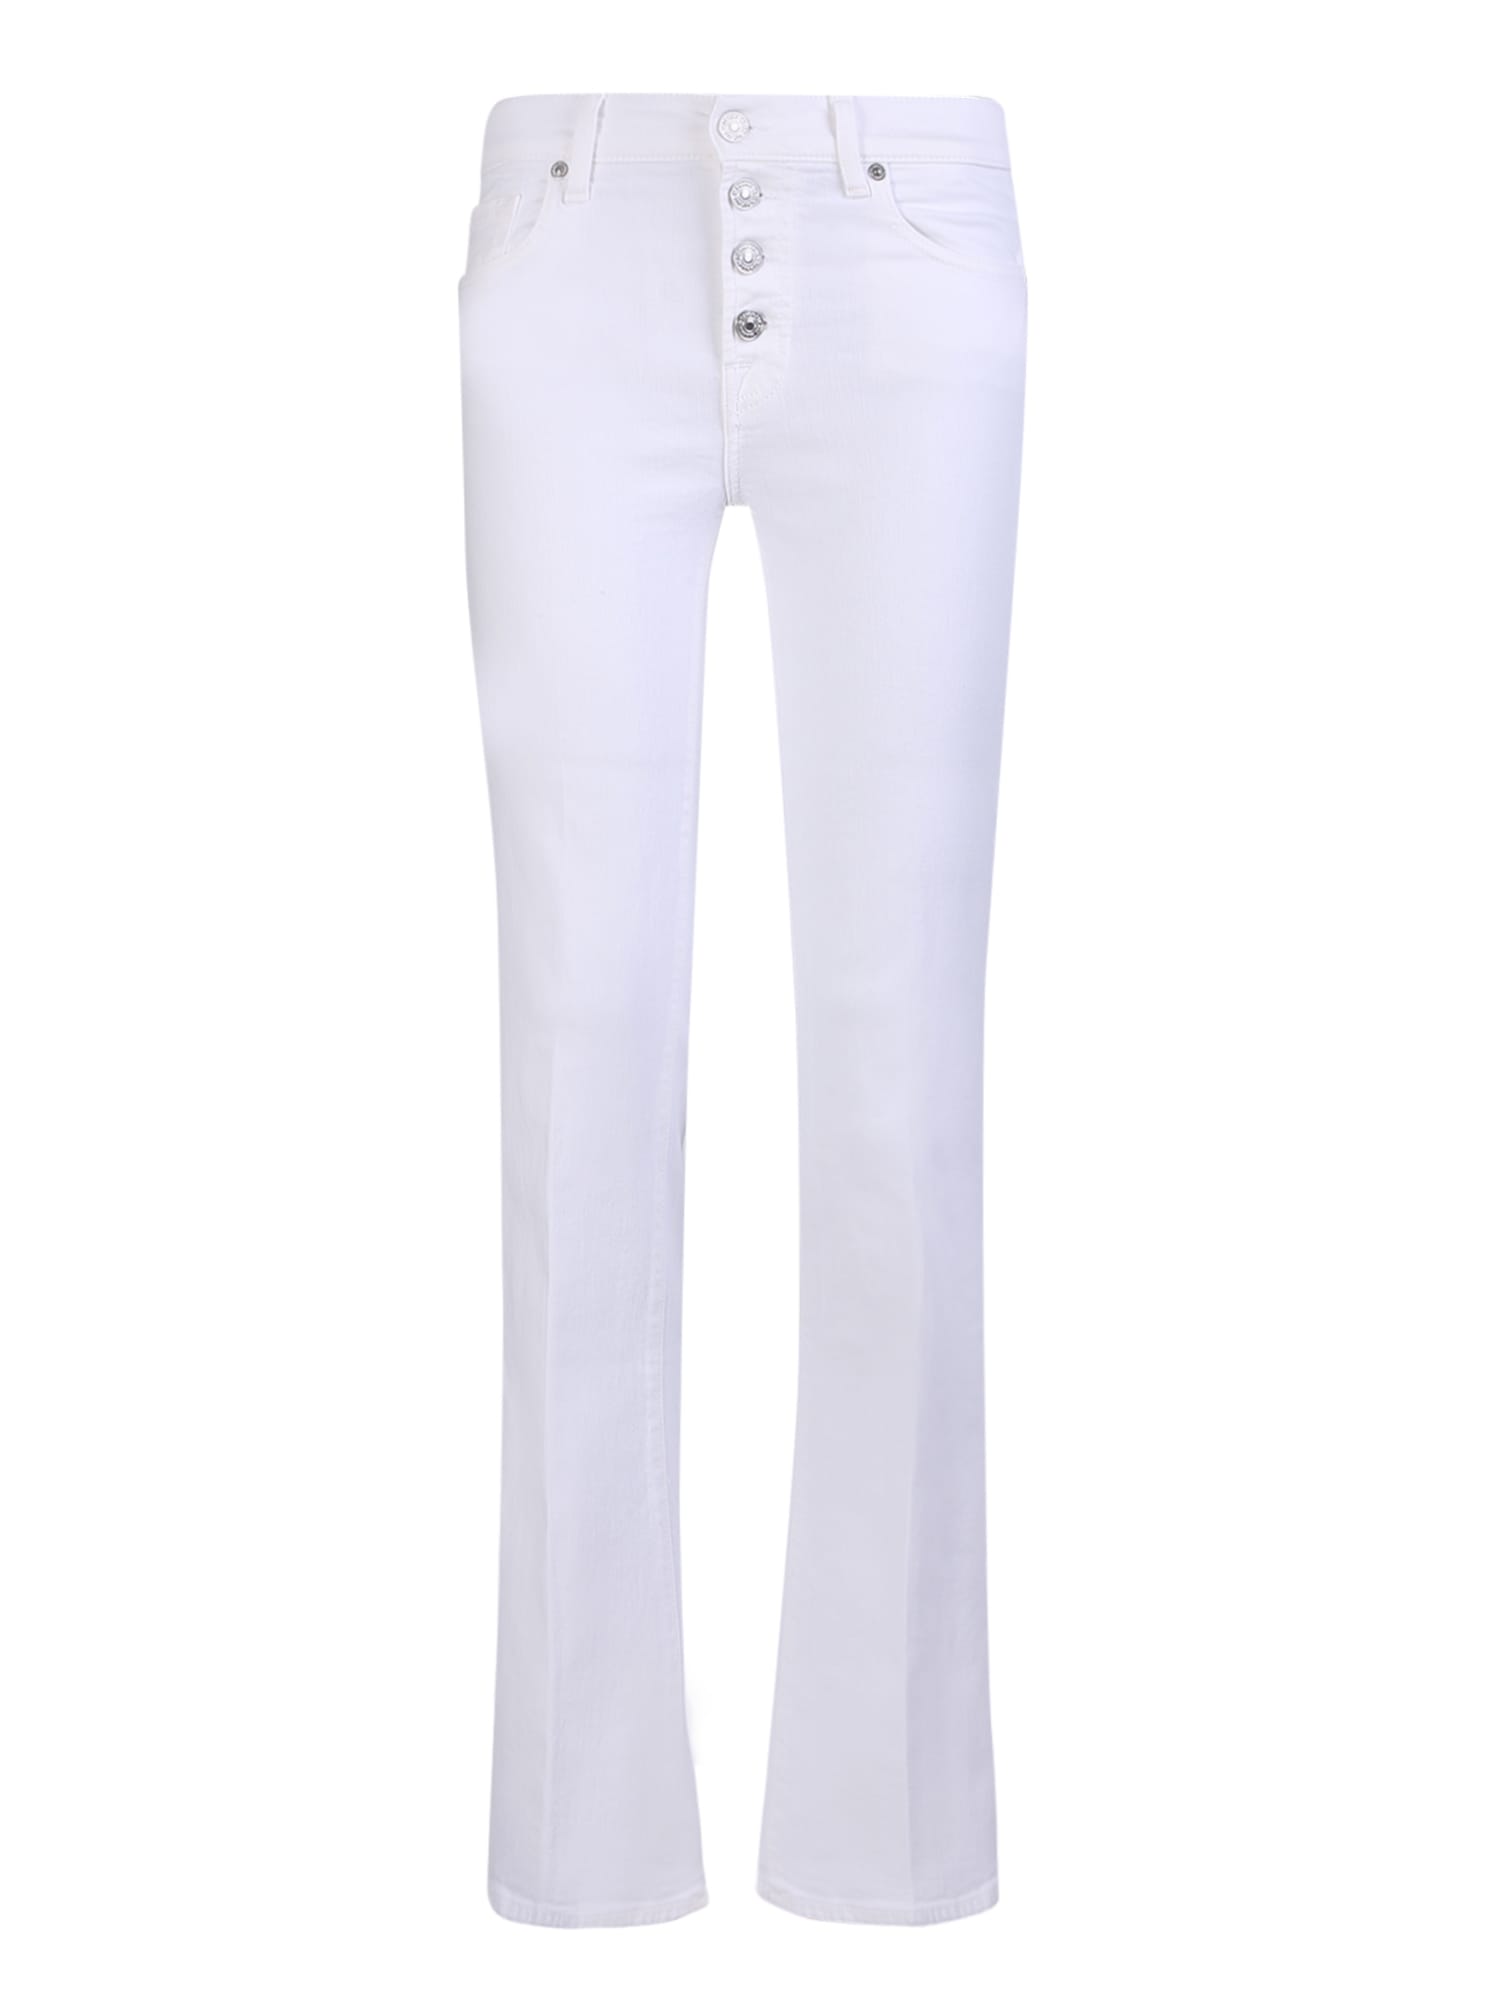 7 for all mankind bootcut white jeans